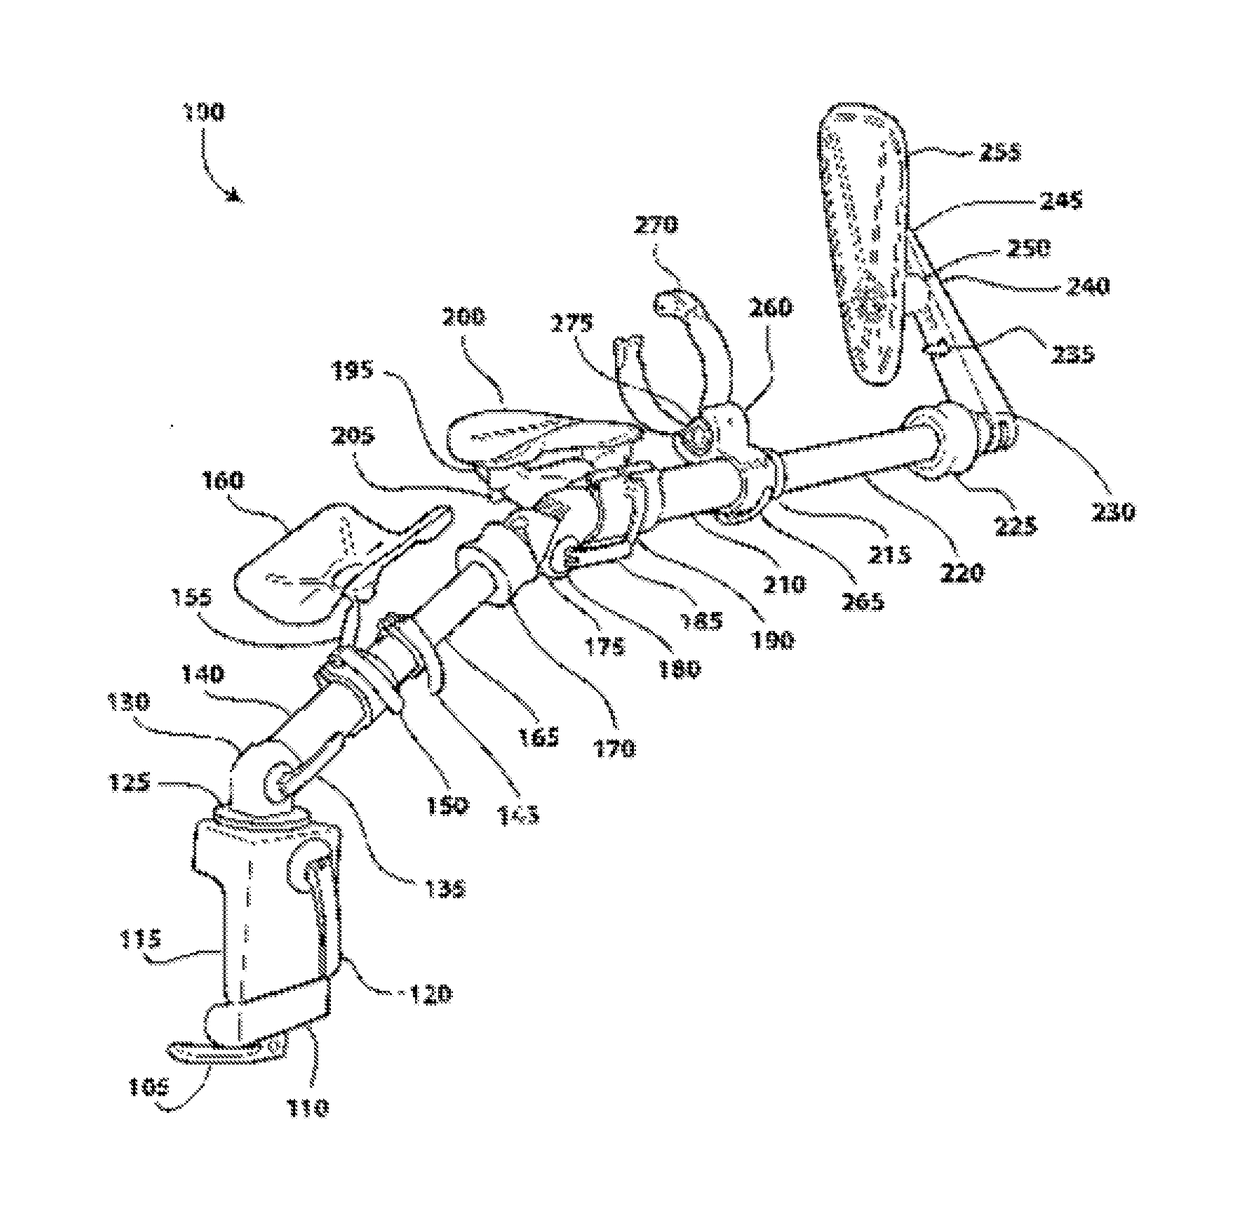 Lift for extremity surgical positioning device